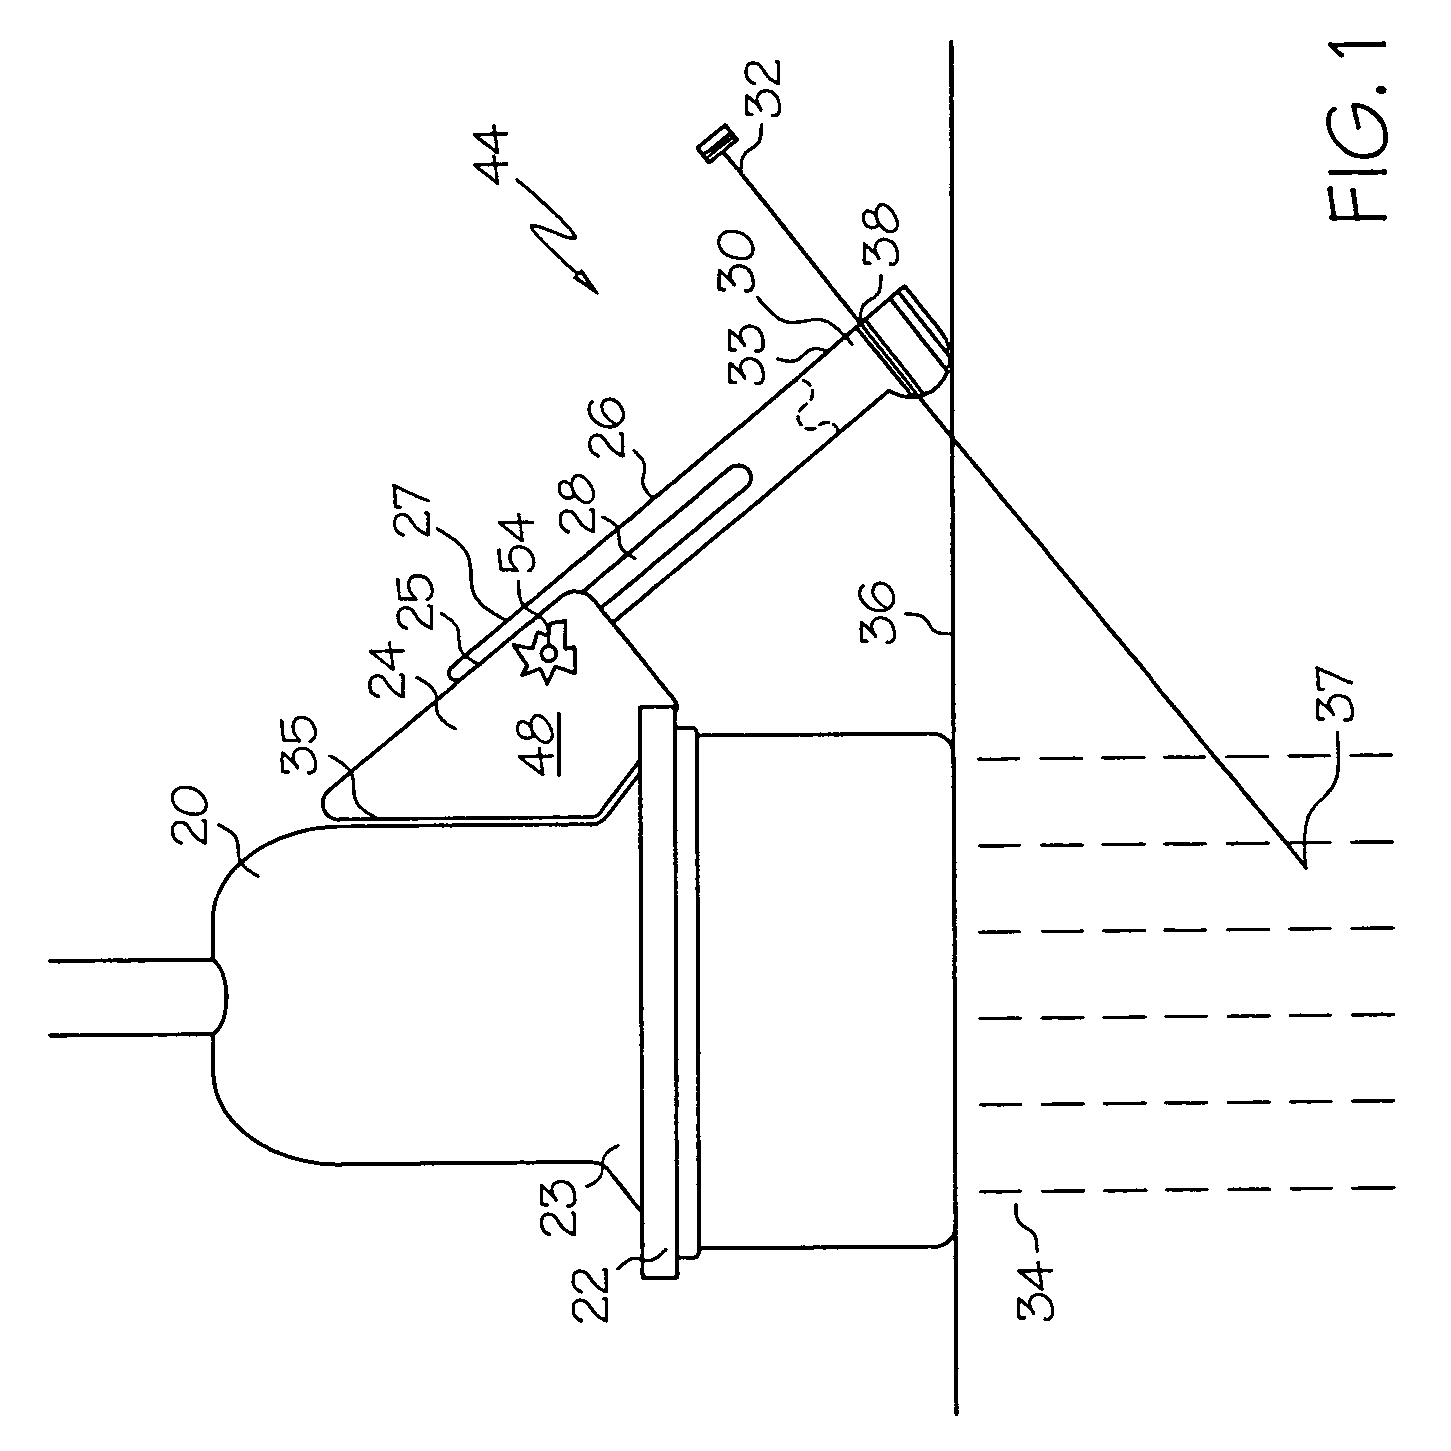 Needle guide systems and methods